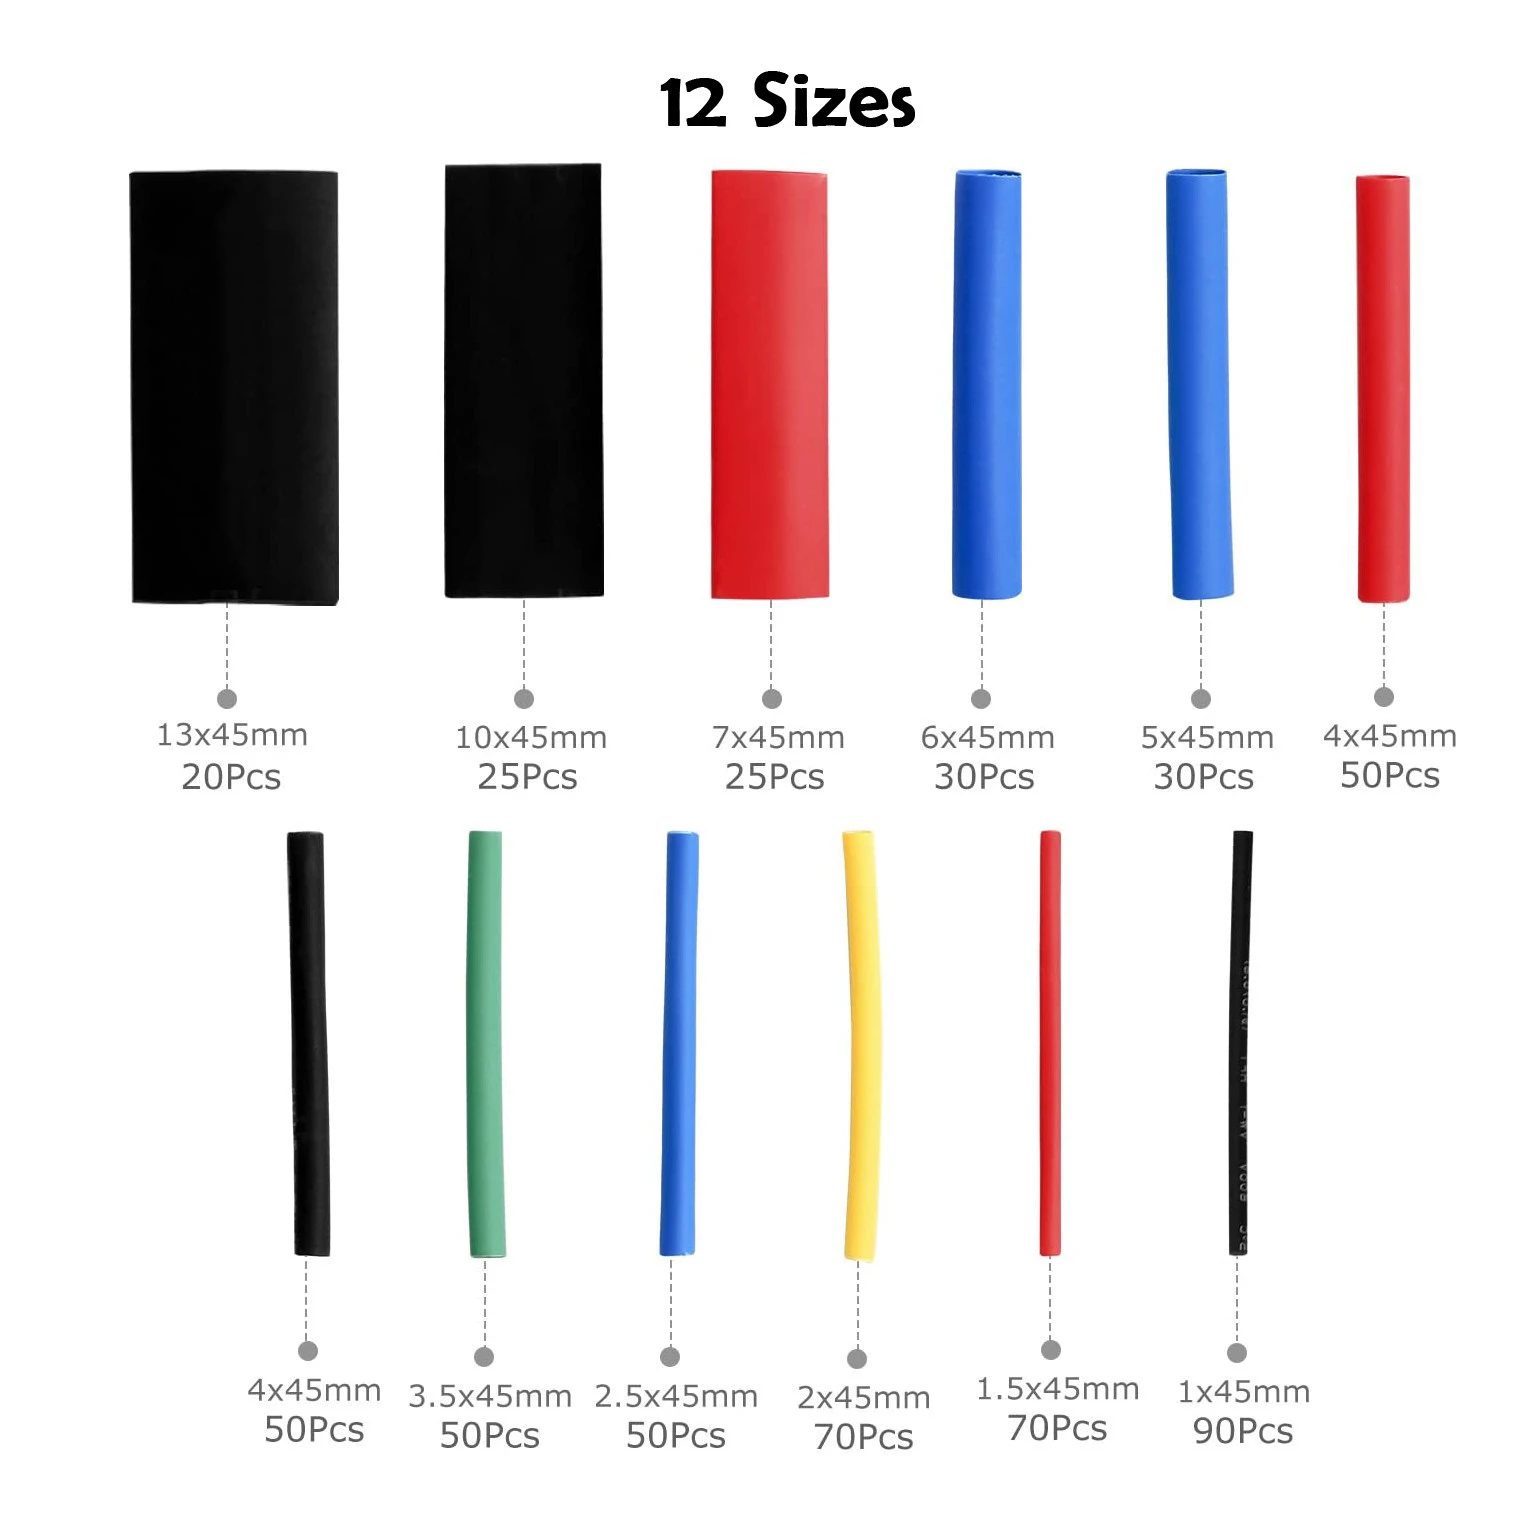 560 pcs Heat Shrink Electric Insulation Wrap Tubing Cable Sleeve